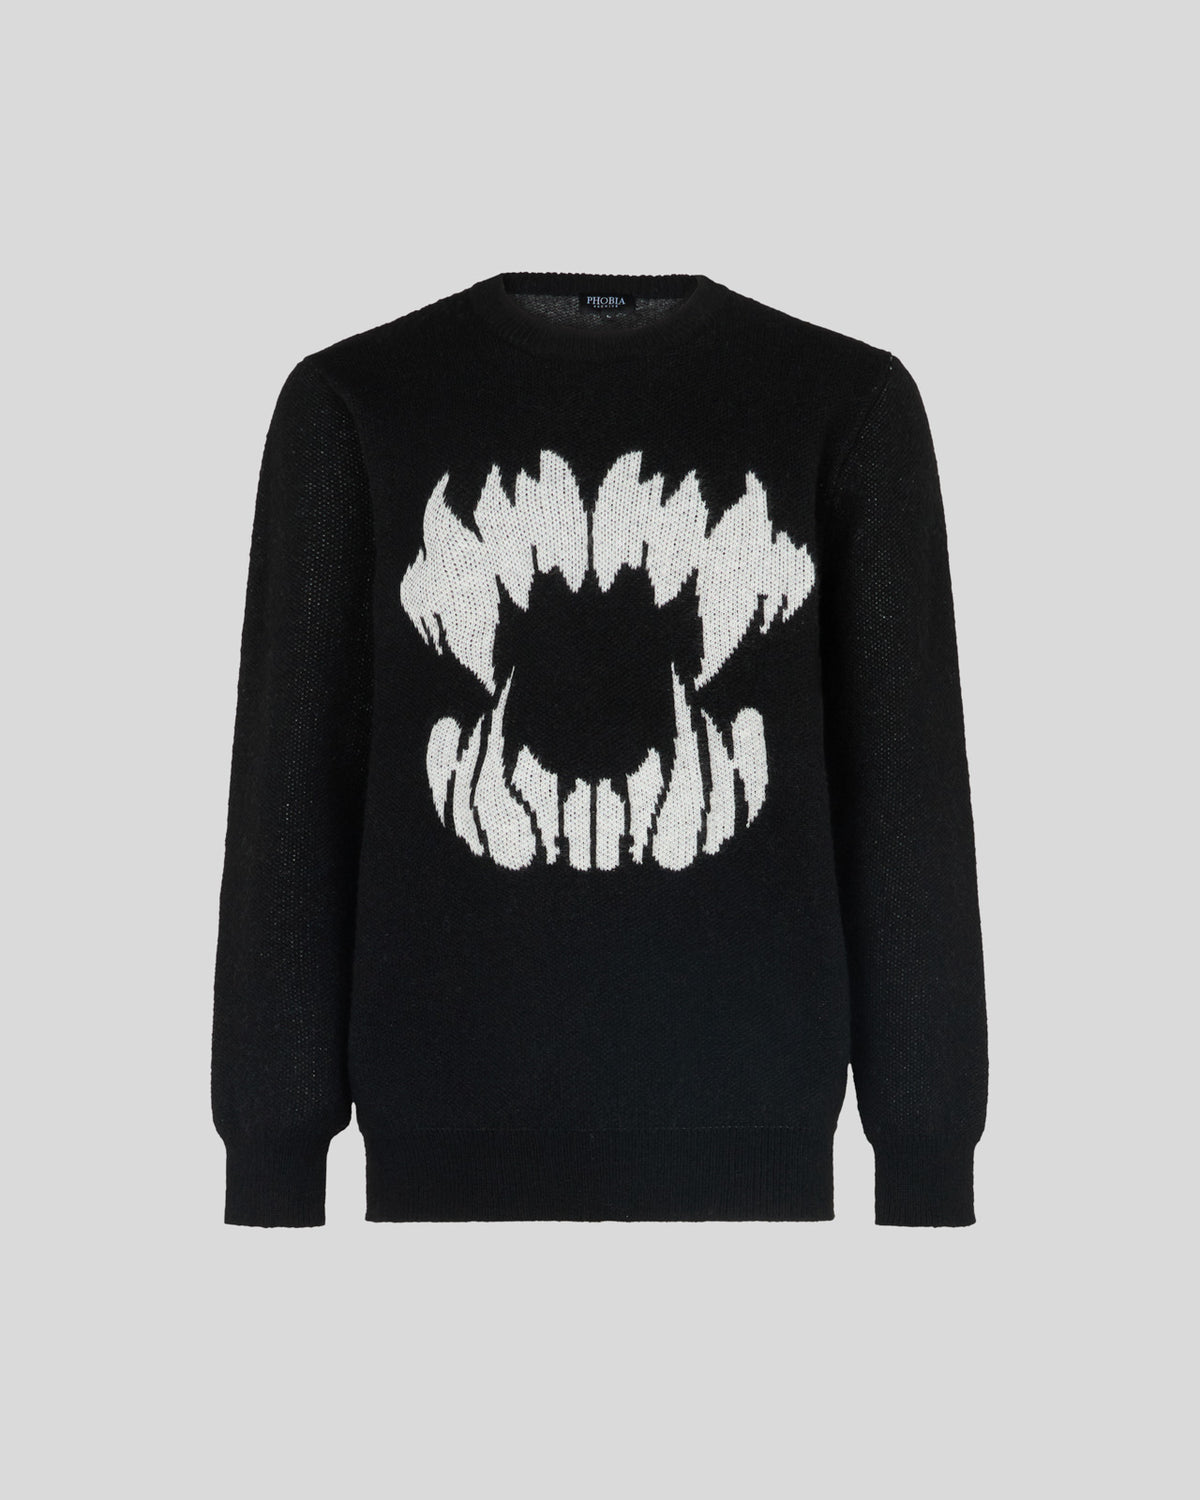 PHOBIA BLACK JUMPER WITH WHITE MOUTH